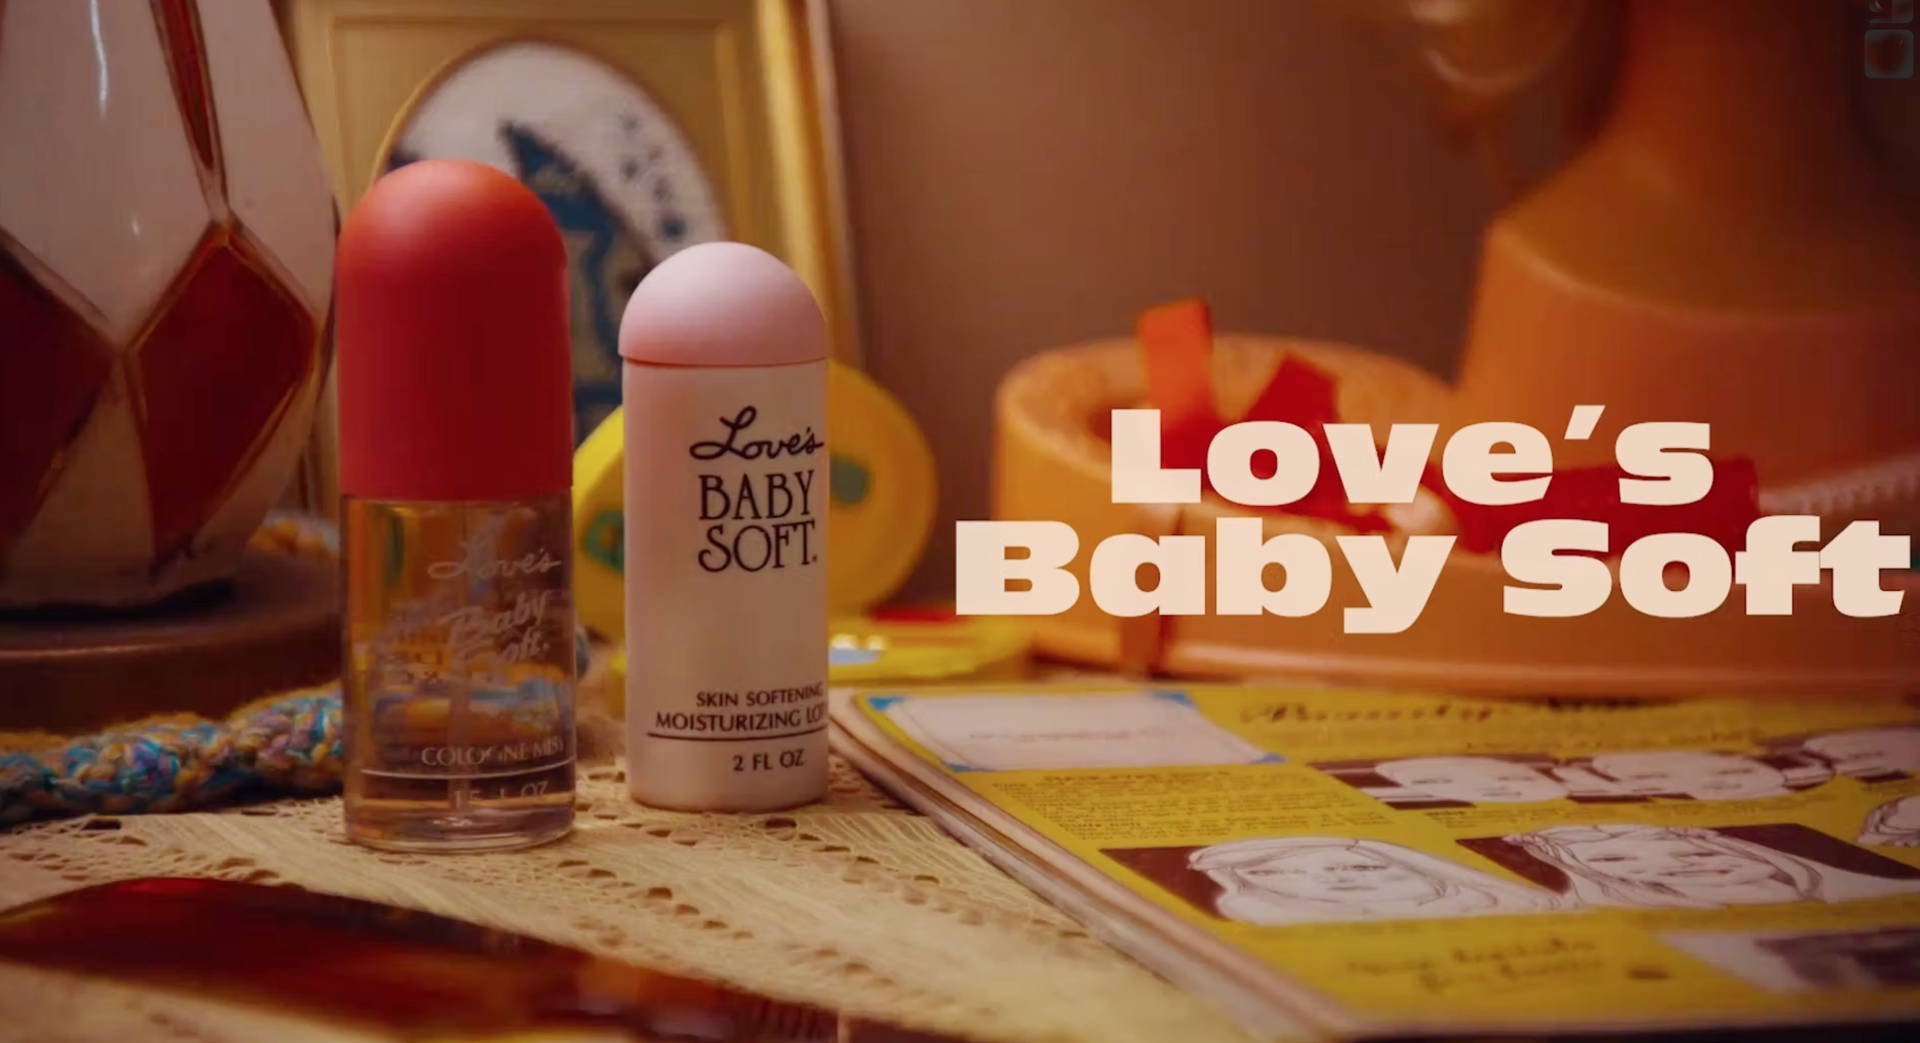 Vintage of Love's Baby Soft bottles on a table, first image of movie. 